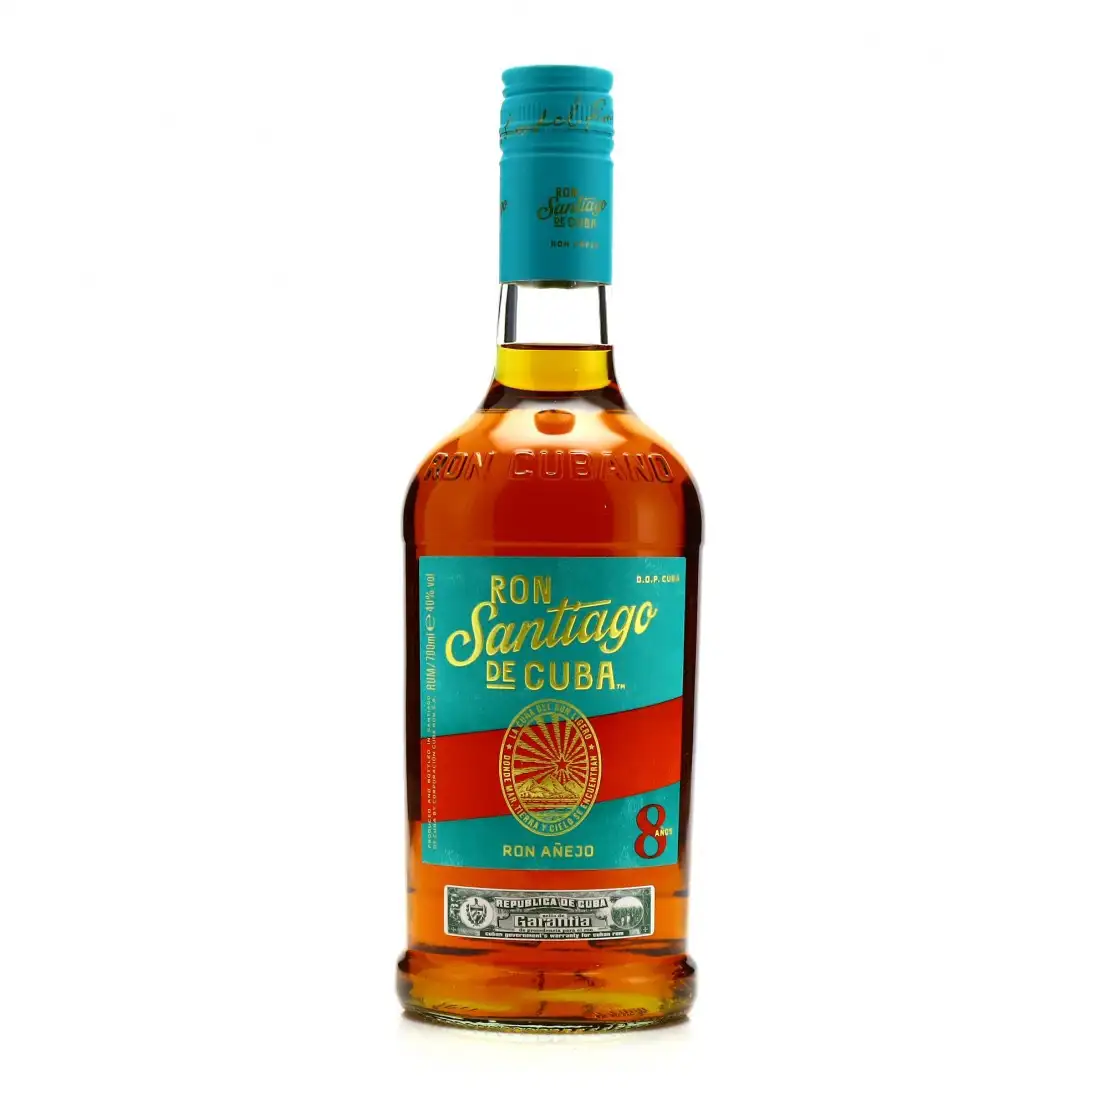 Image of the front of the bottle of the rum Ron Añejo 8 Años